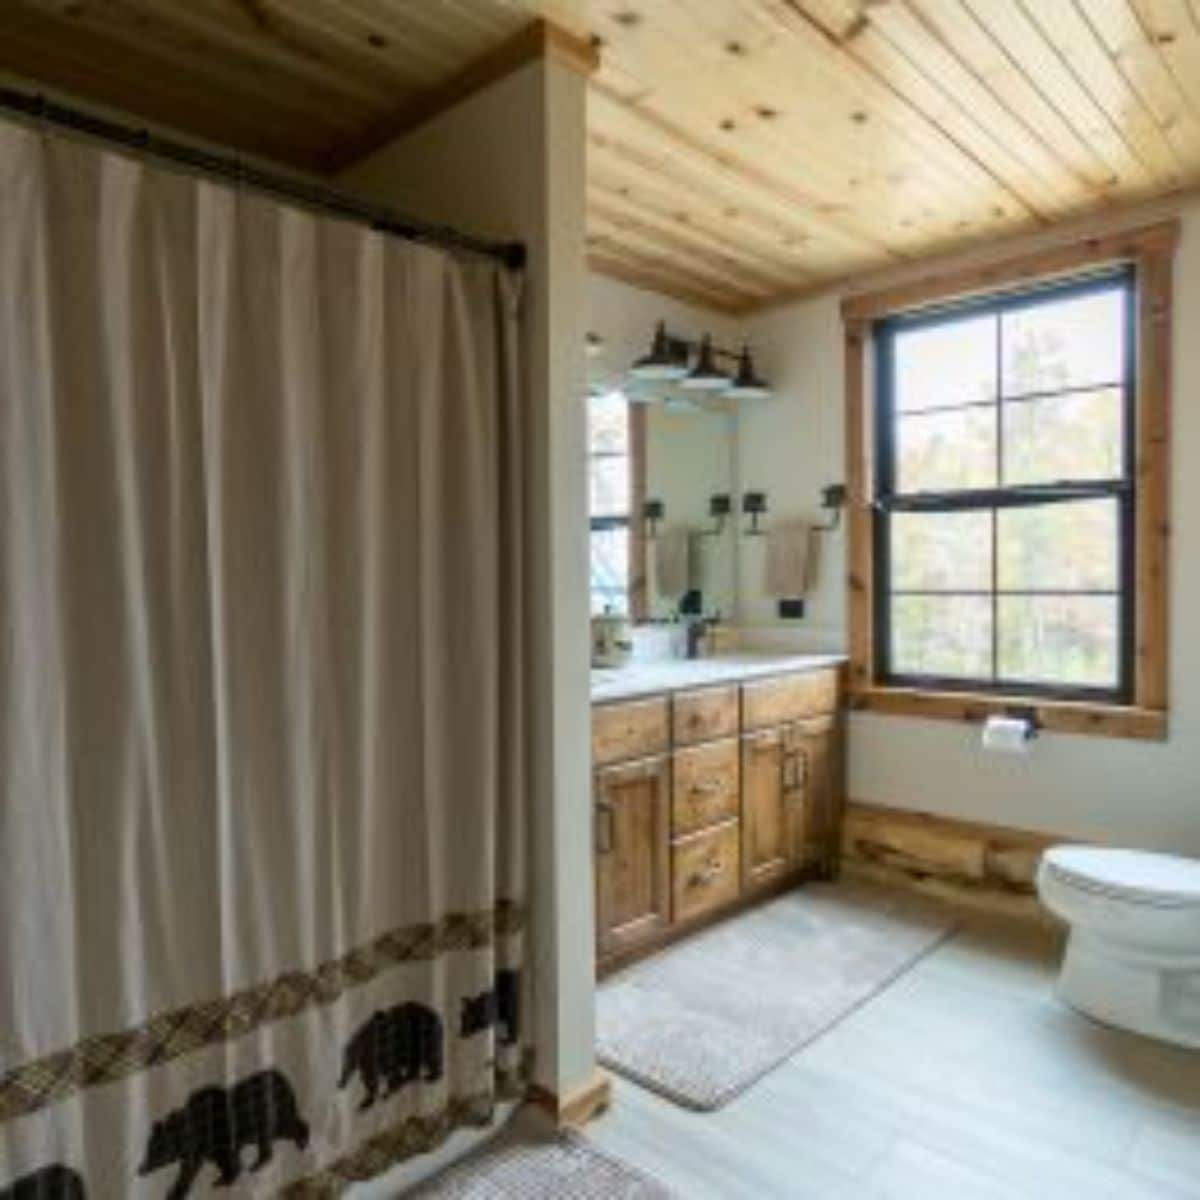 rustic shower curtain with bears on bottom on shower on left of image with toilet on right